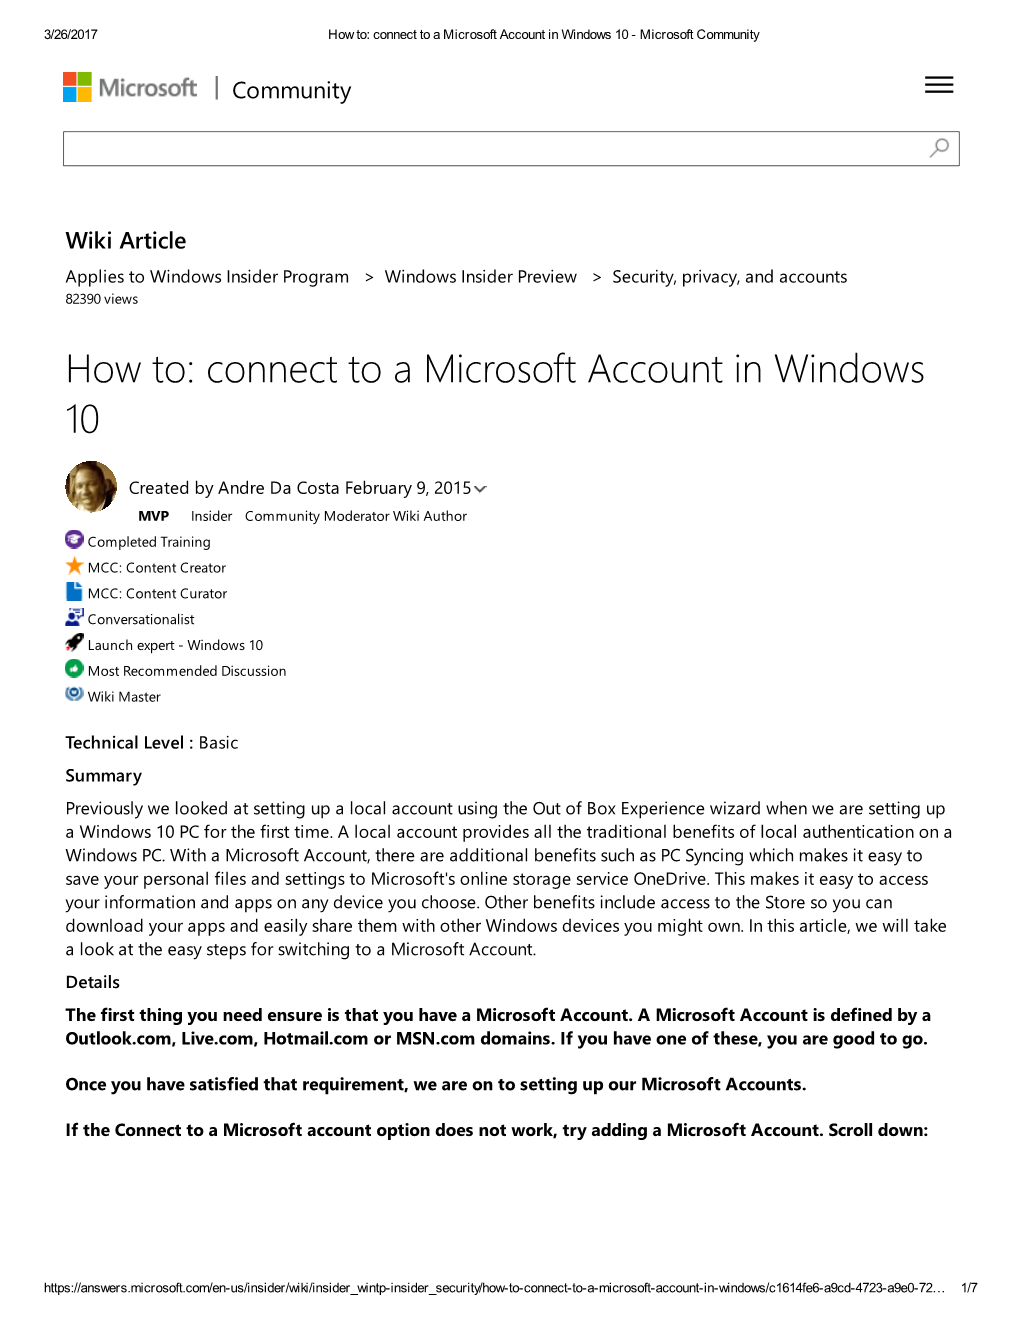 How To: Connect to a Microsoft Account in Windows 10 ­ Microsoft Community